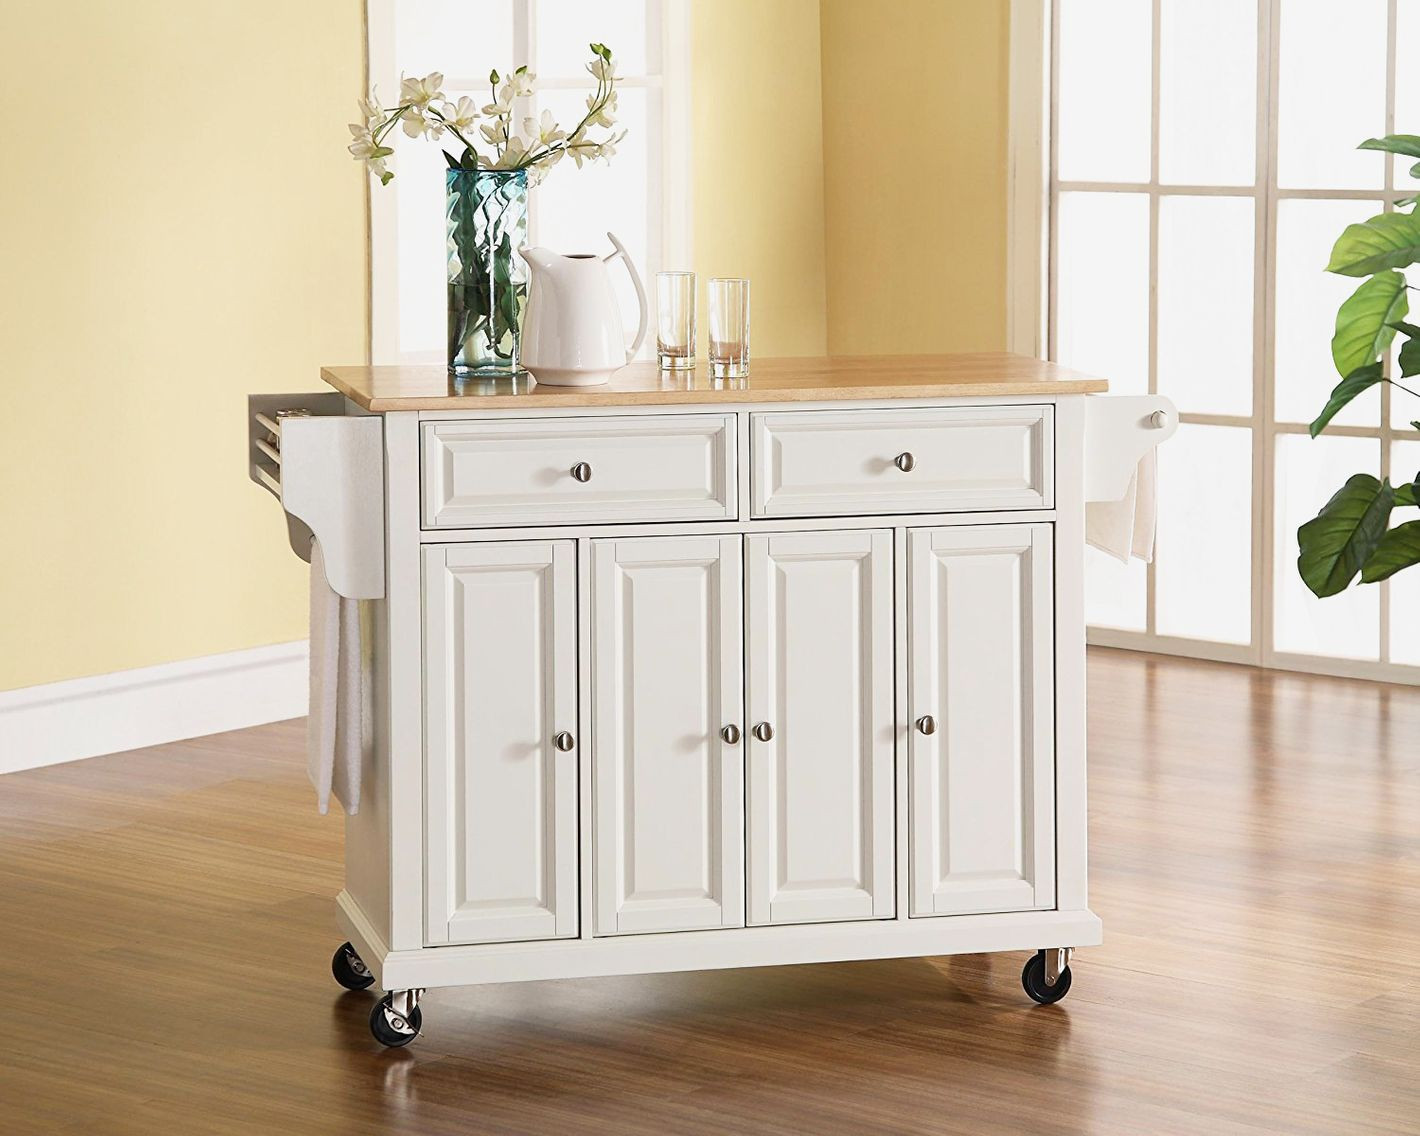 White Rolling Kitchen Island
 The 14 Best Butcher Block Kitchen Islands and Carts — 2018